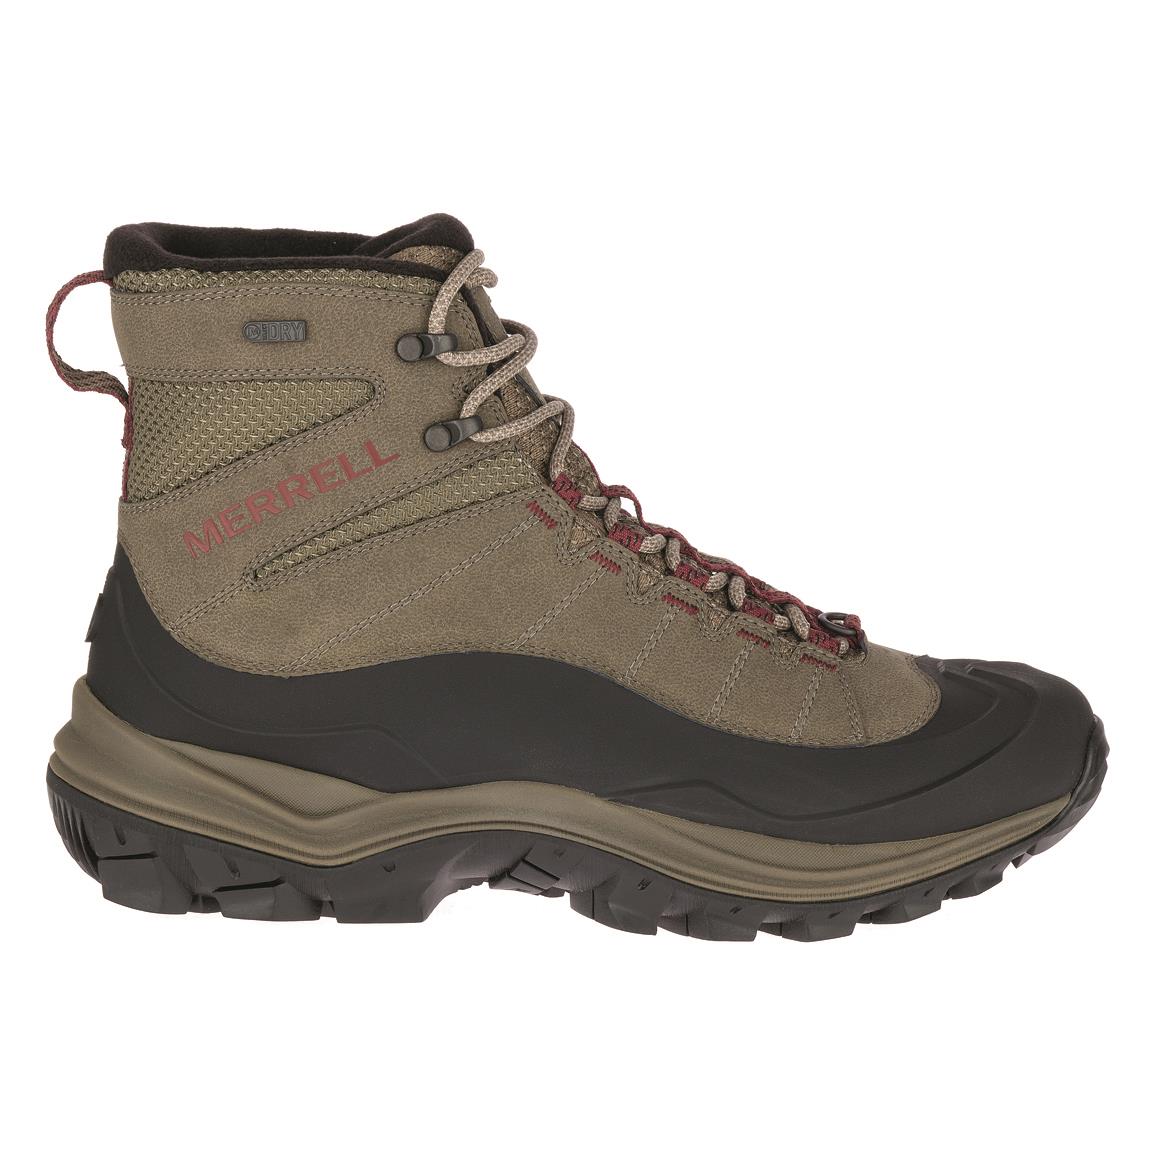 Merrell Men's Thermo Chill Insulated 